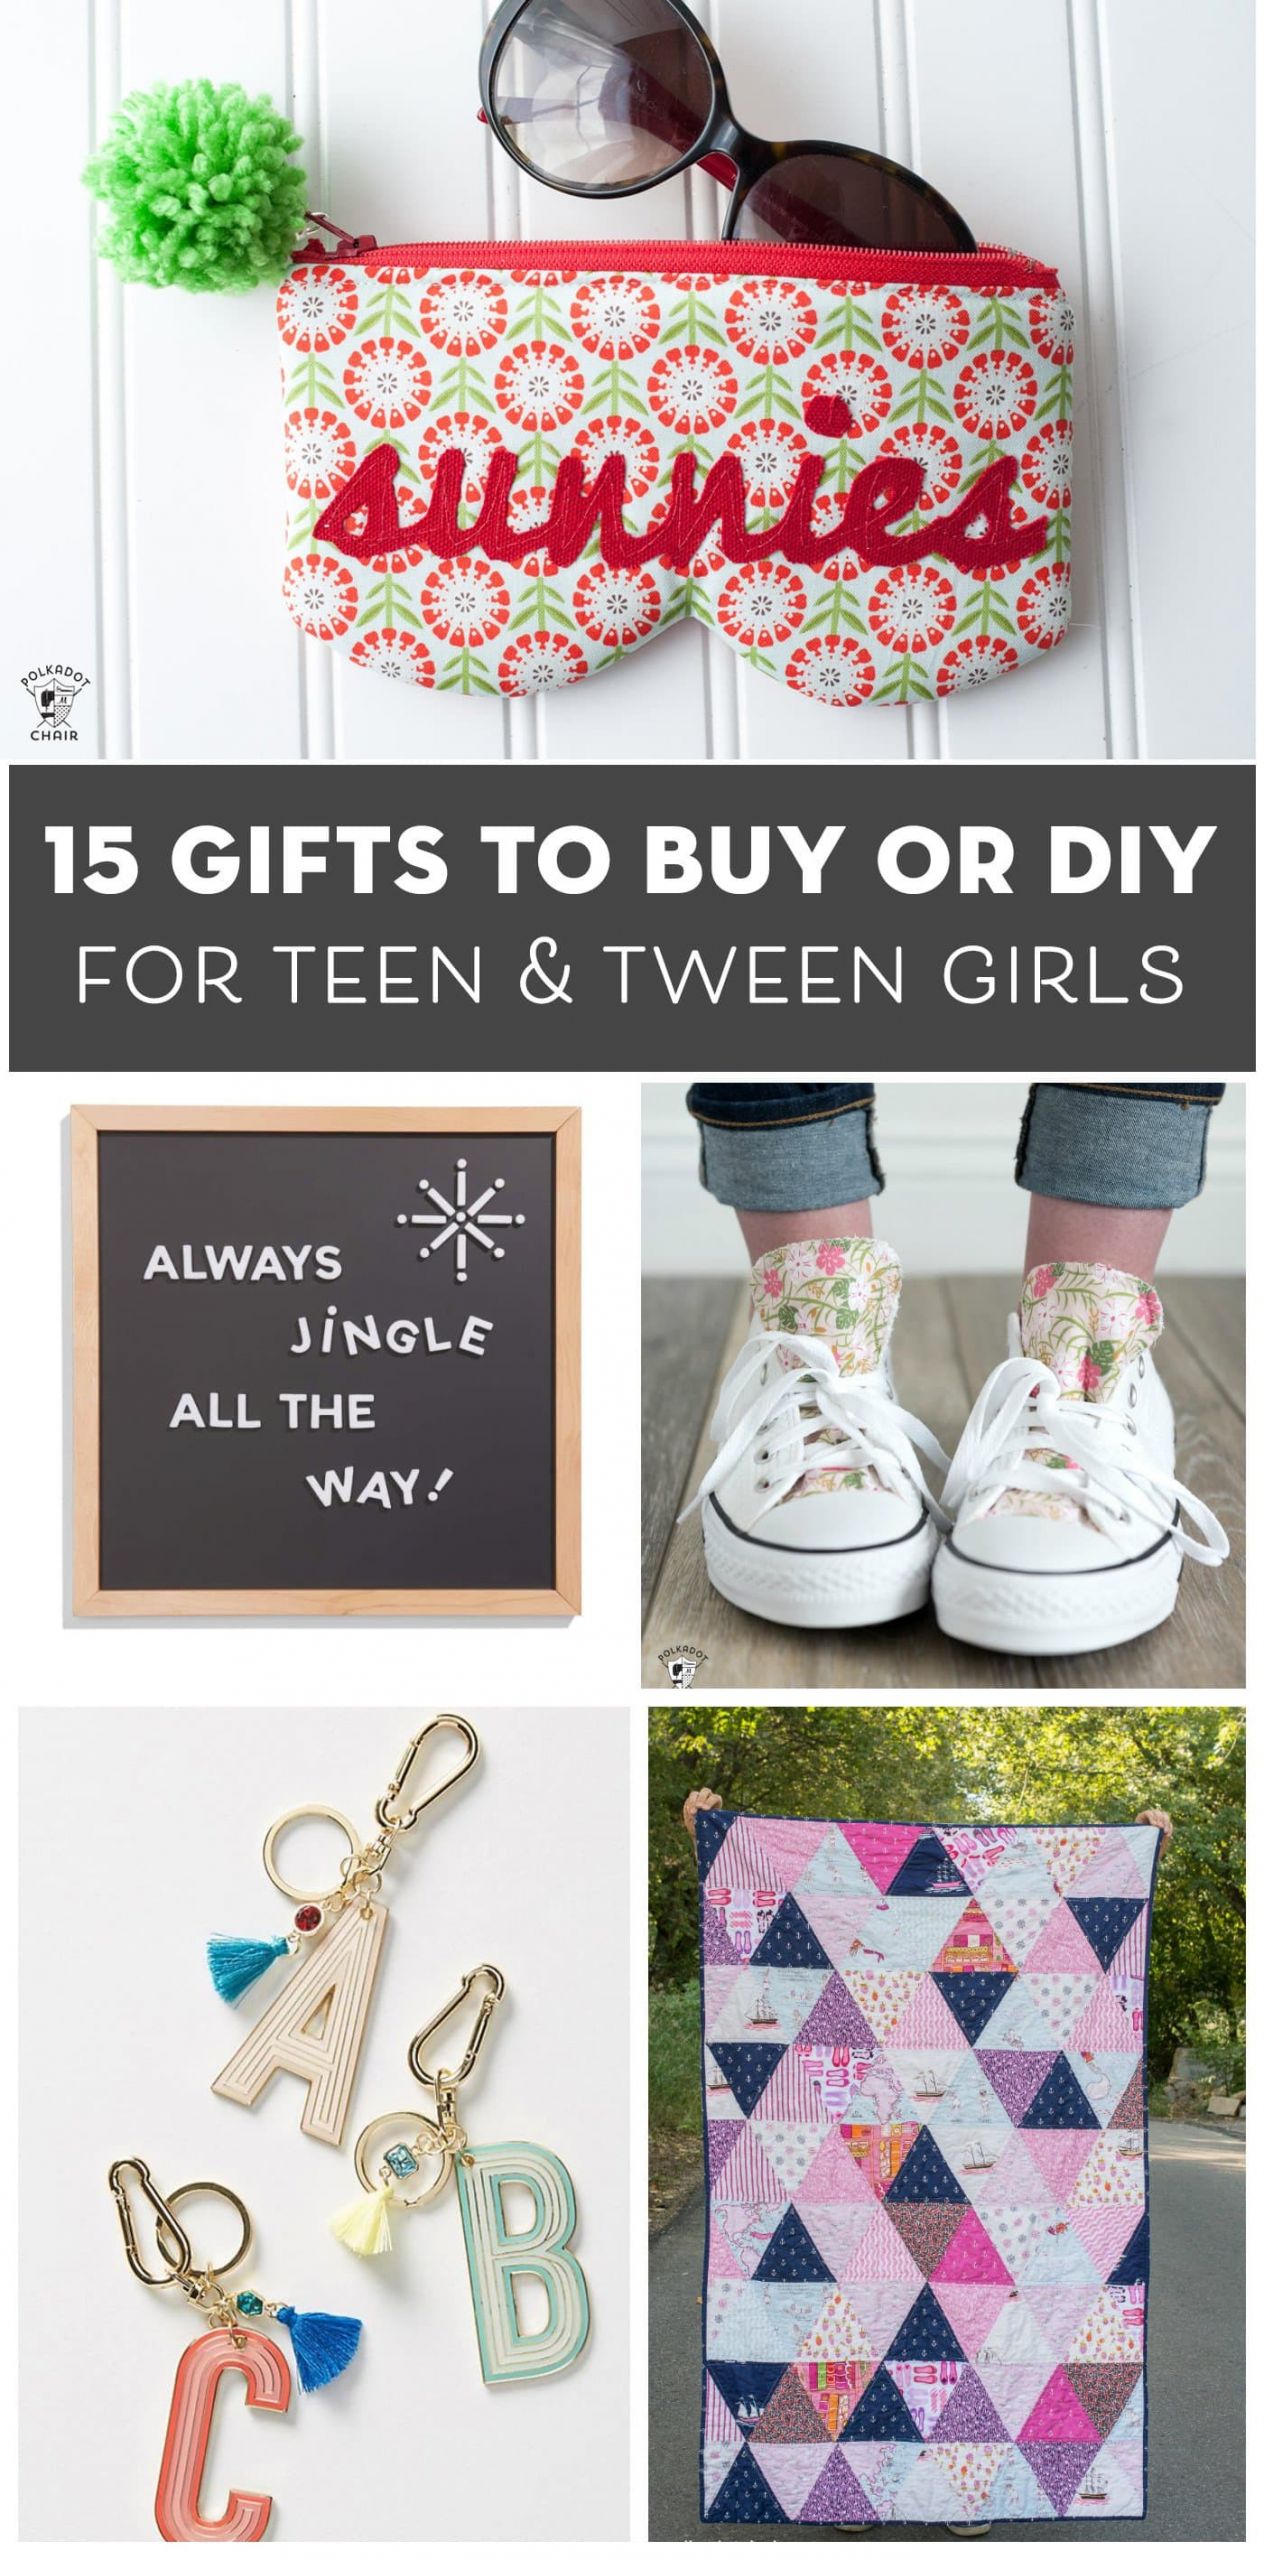 Teenage Gift Ideas For Girls
 15 Gift Ideas for Teenage Girls That You Can DIY or Buy